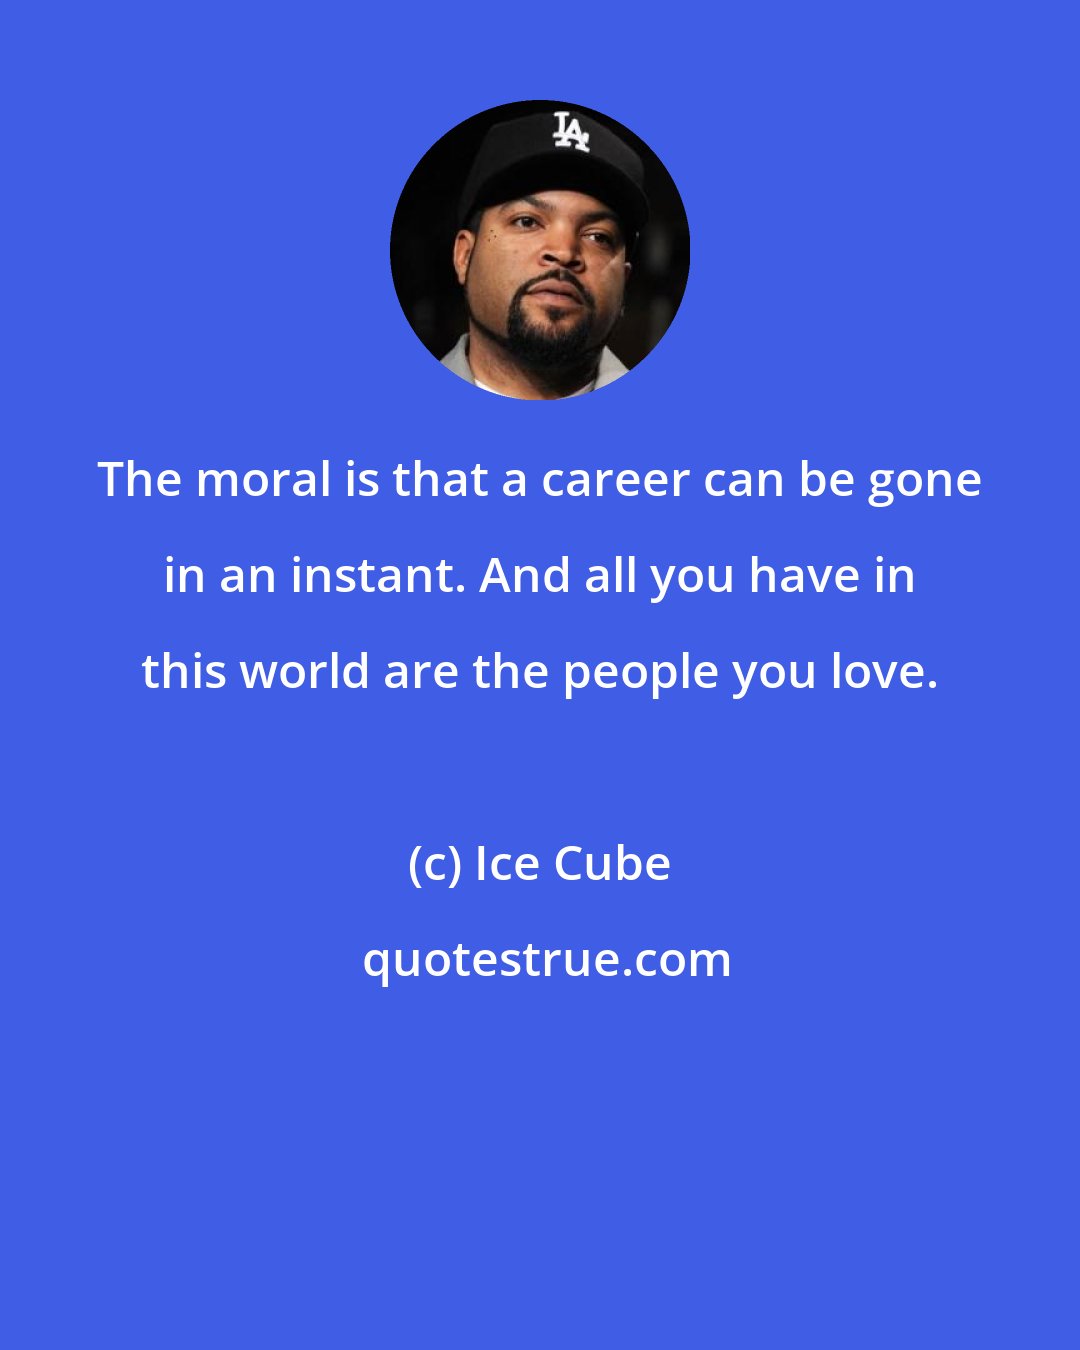 Ice Cube: The moral is that a career can be gone in an instant. And all you have in this world are the people you love.